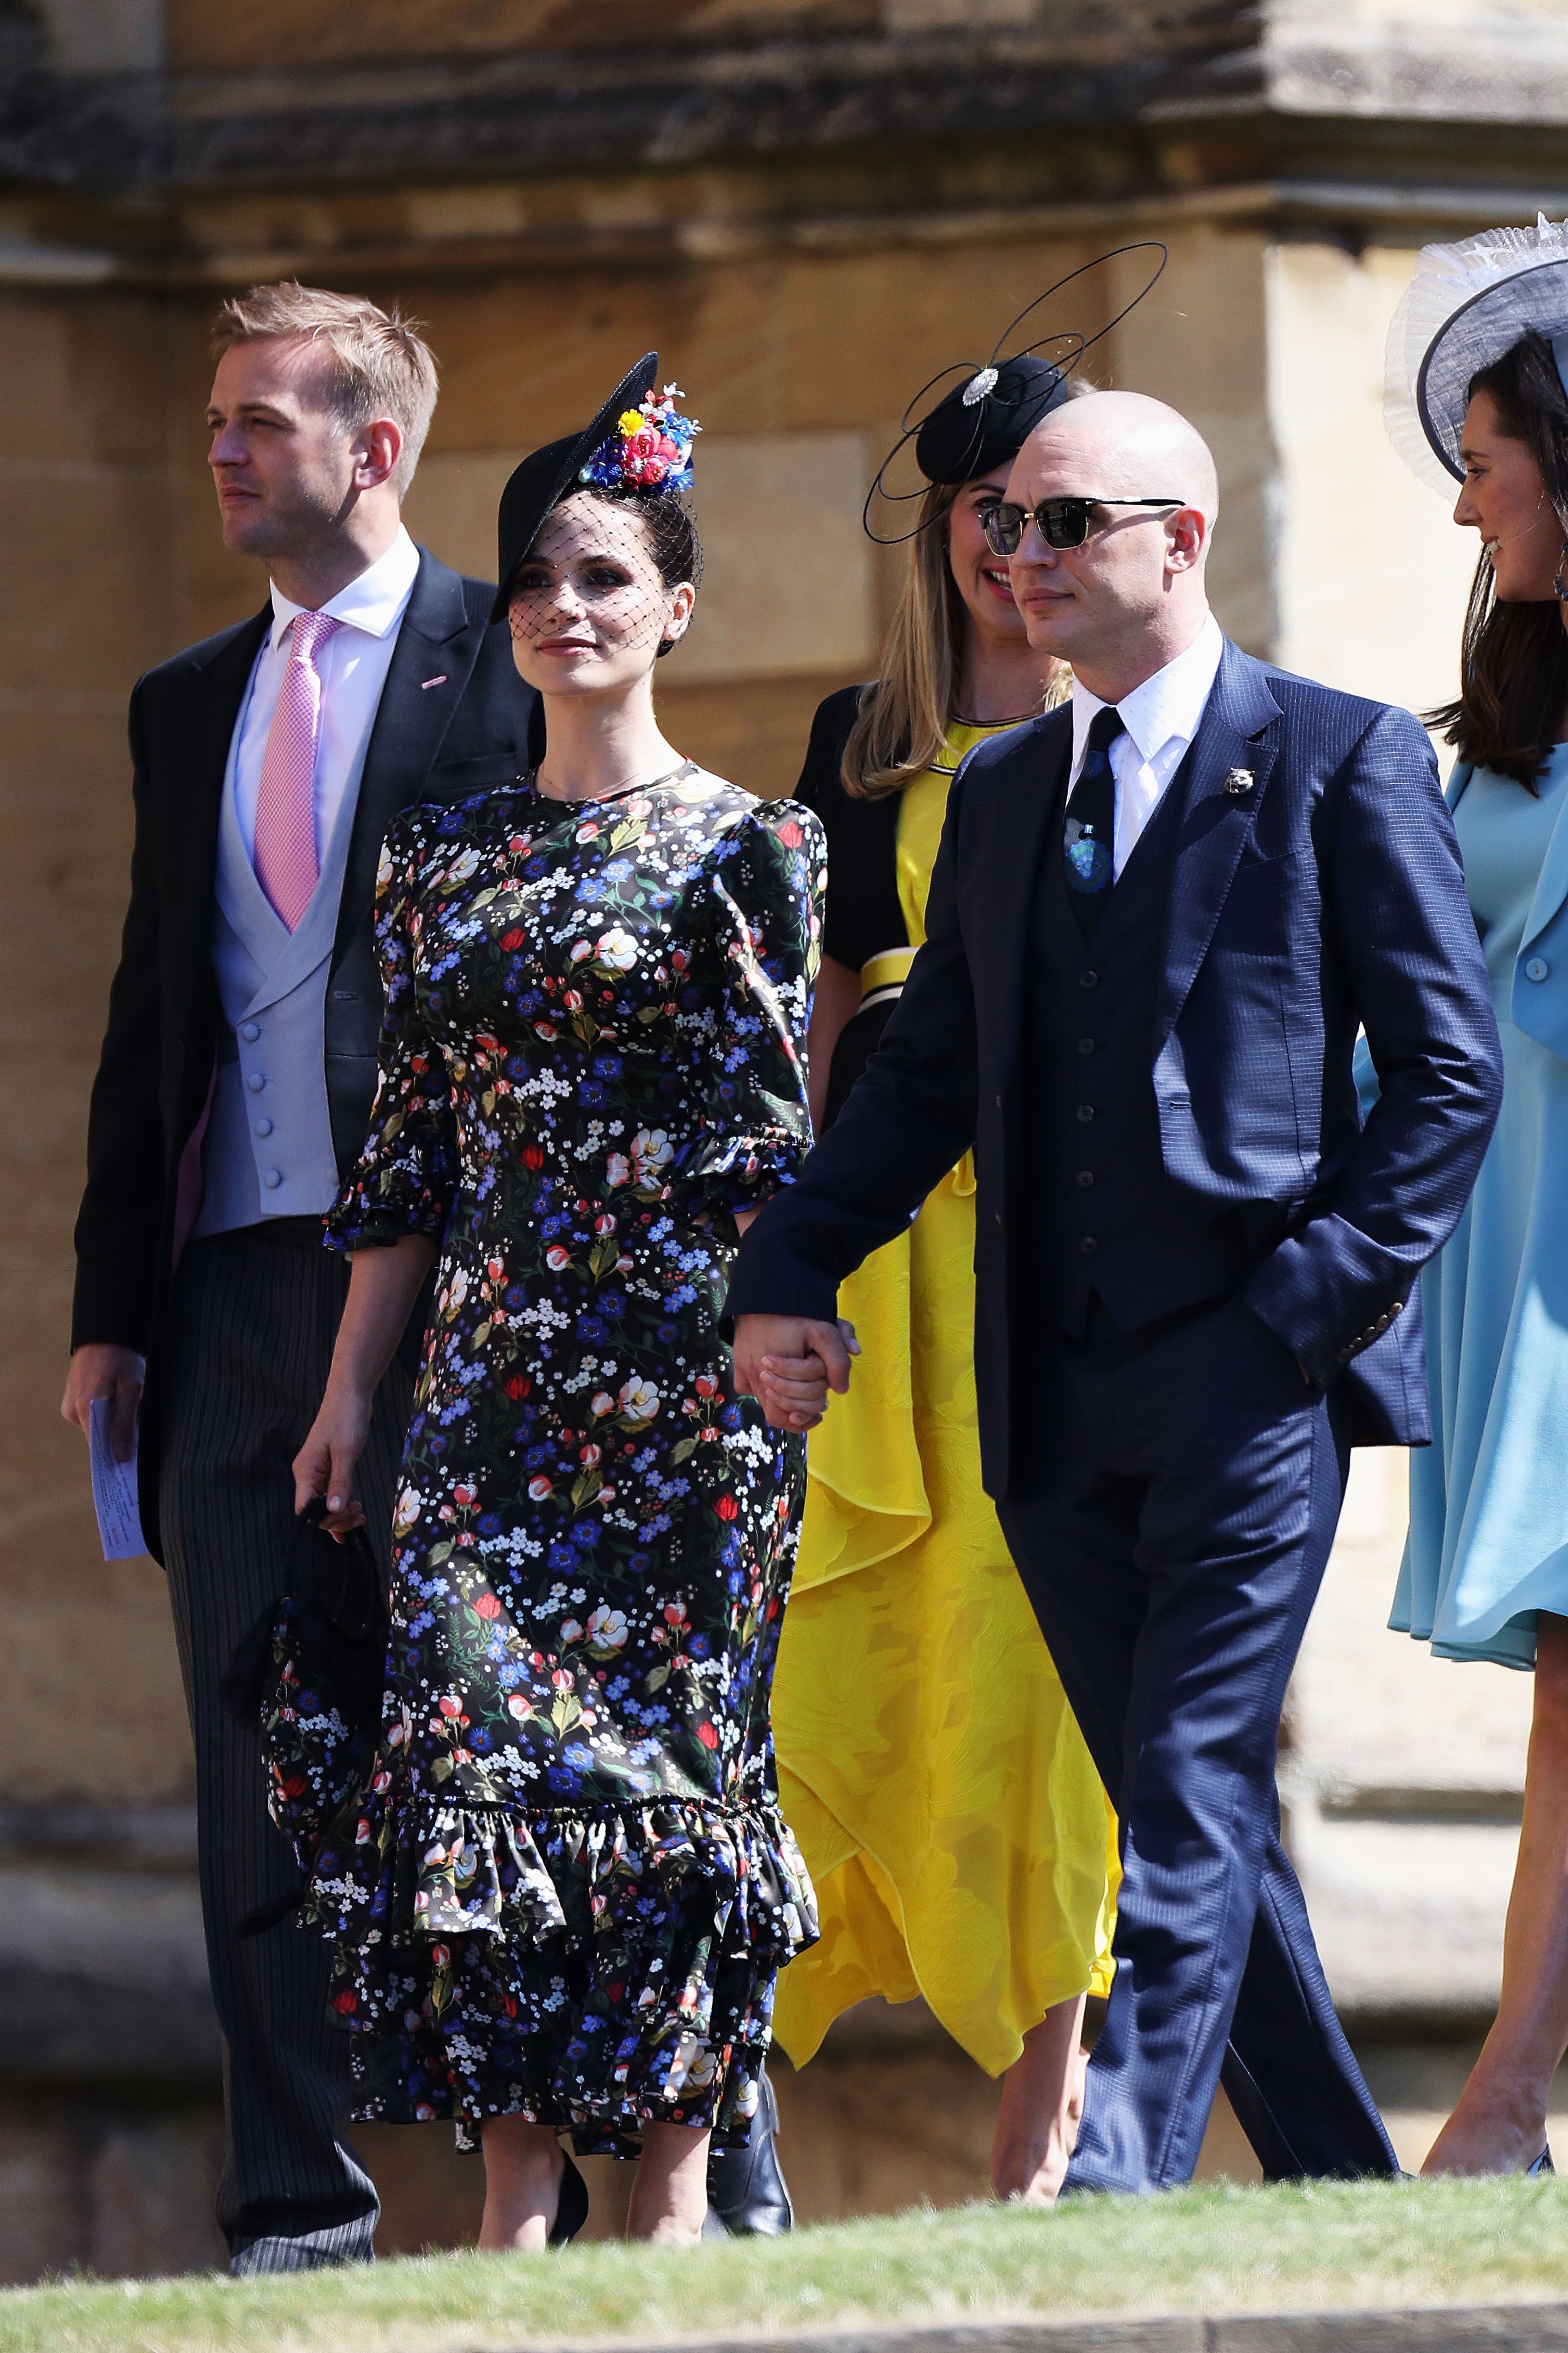 Royal Wedding 2018 Best Dressed - Celebrity and Royal Fashion at